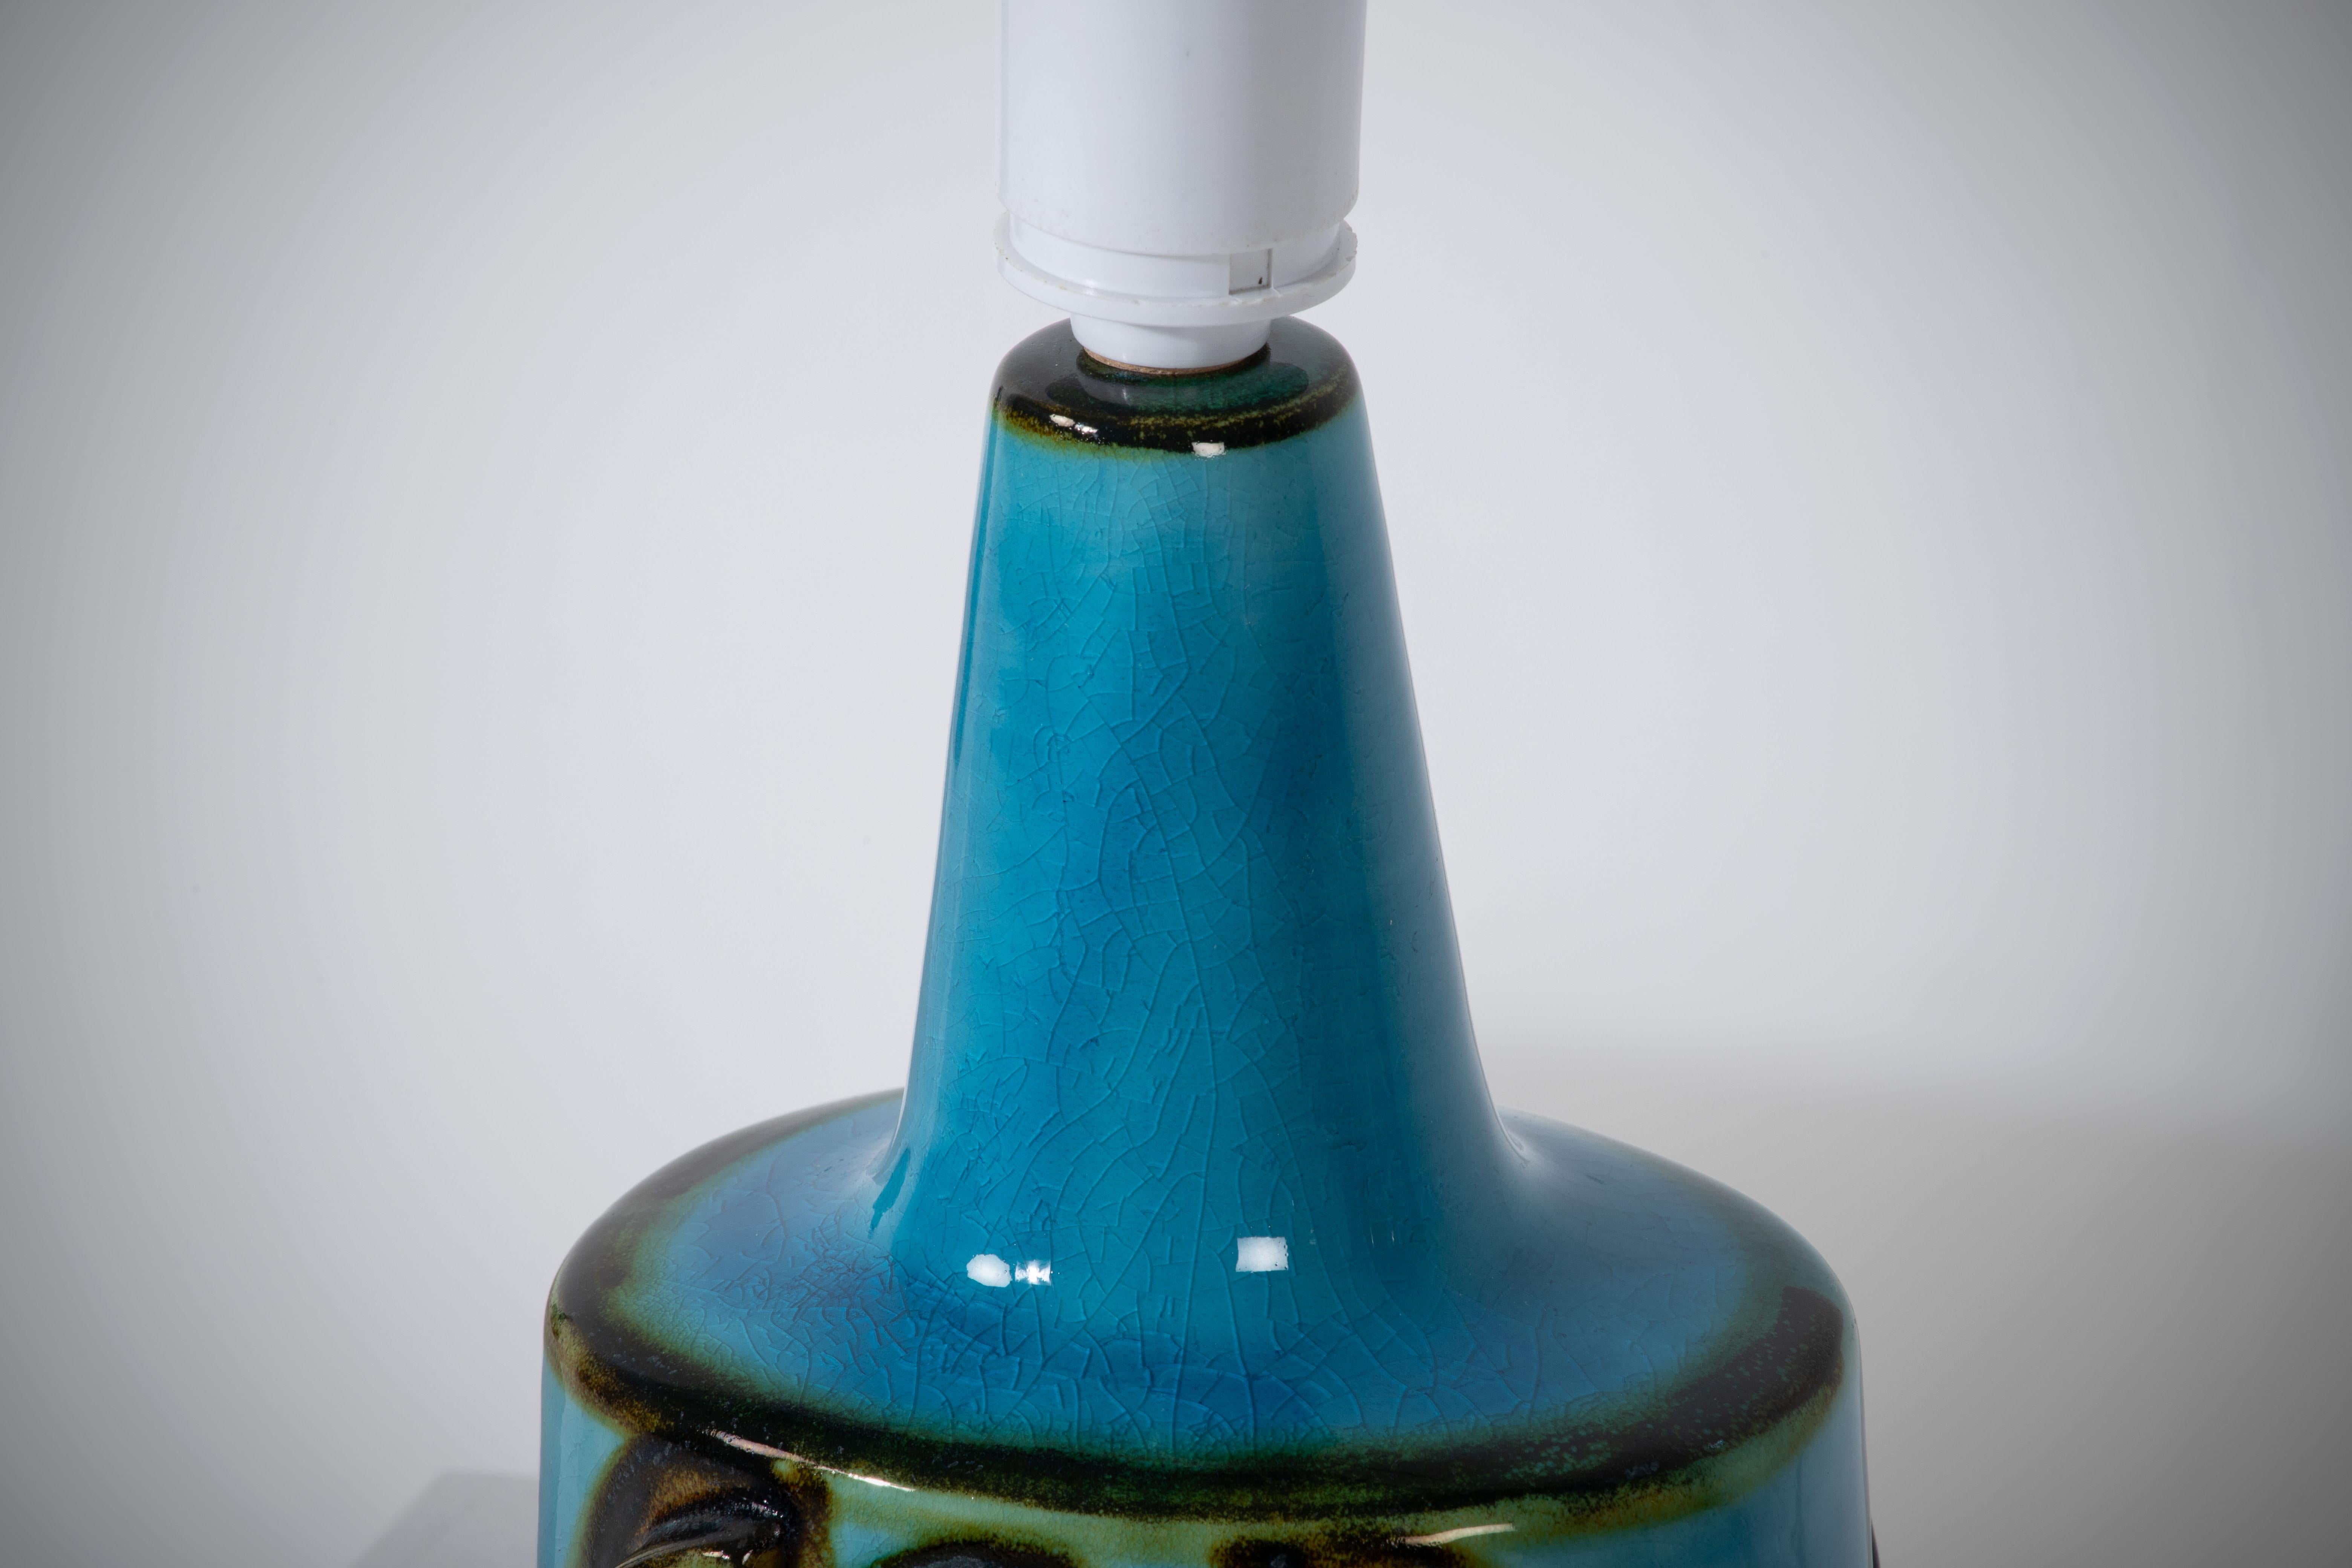 Pair of Turquoise Søholm Table Lamps by Einar Johansen, Denmark, 1960s For Sale 1